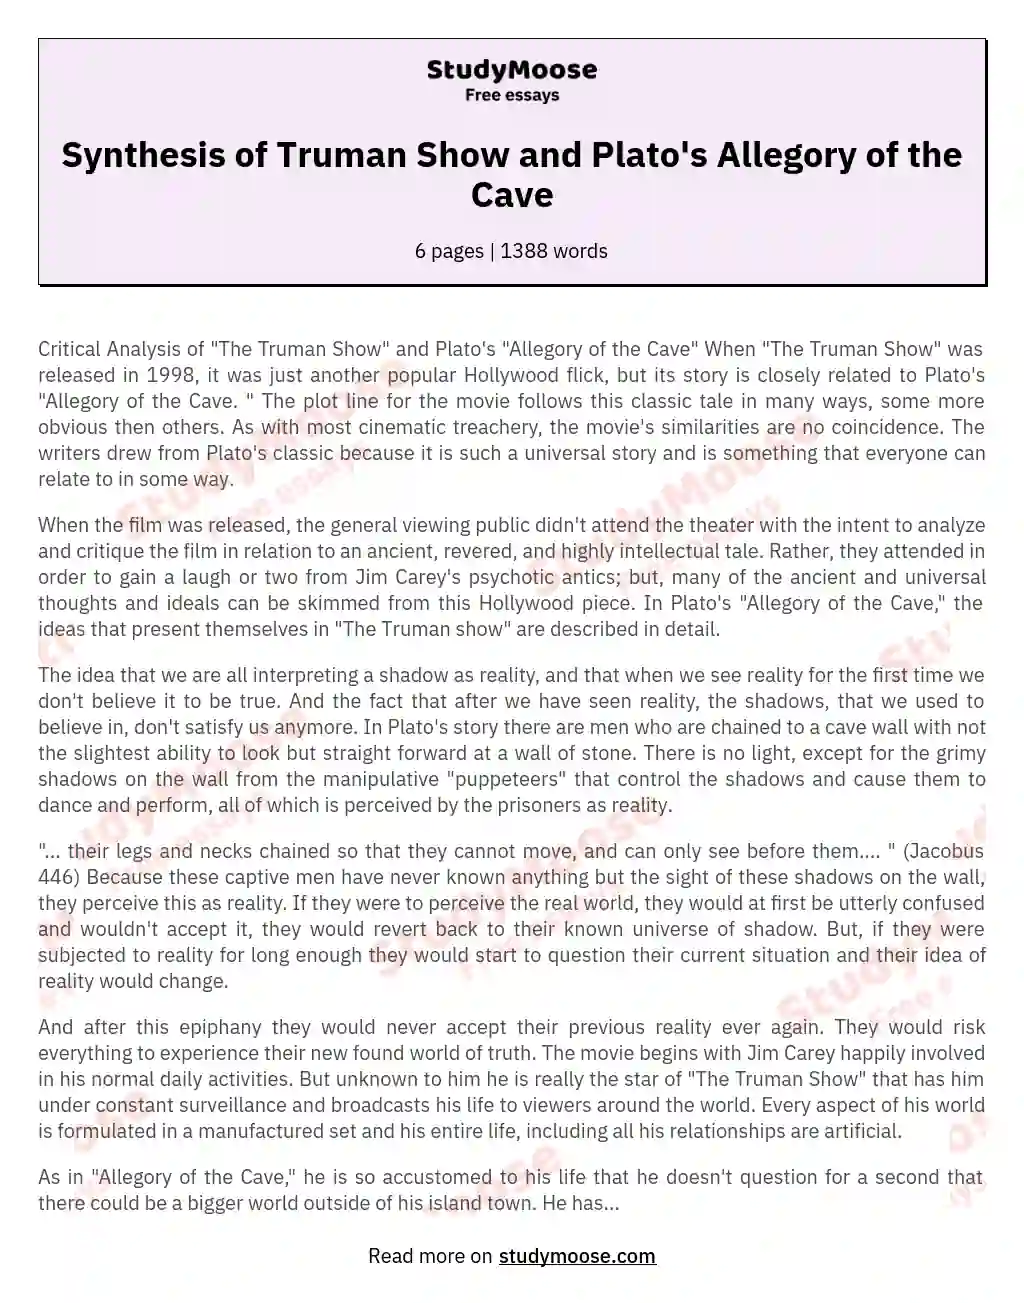 Synthesis of Truman Show and Plato's Allegory of the Cave